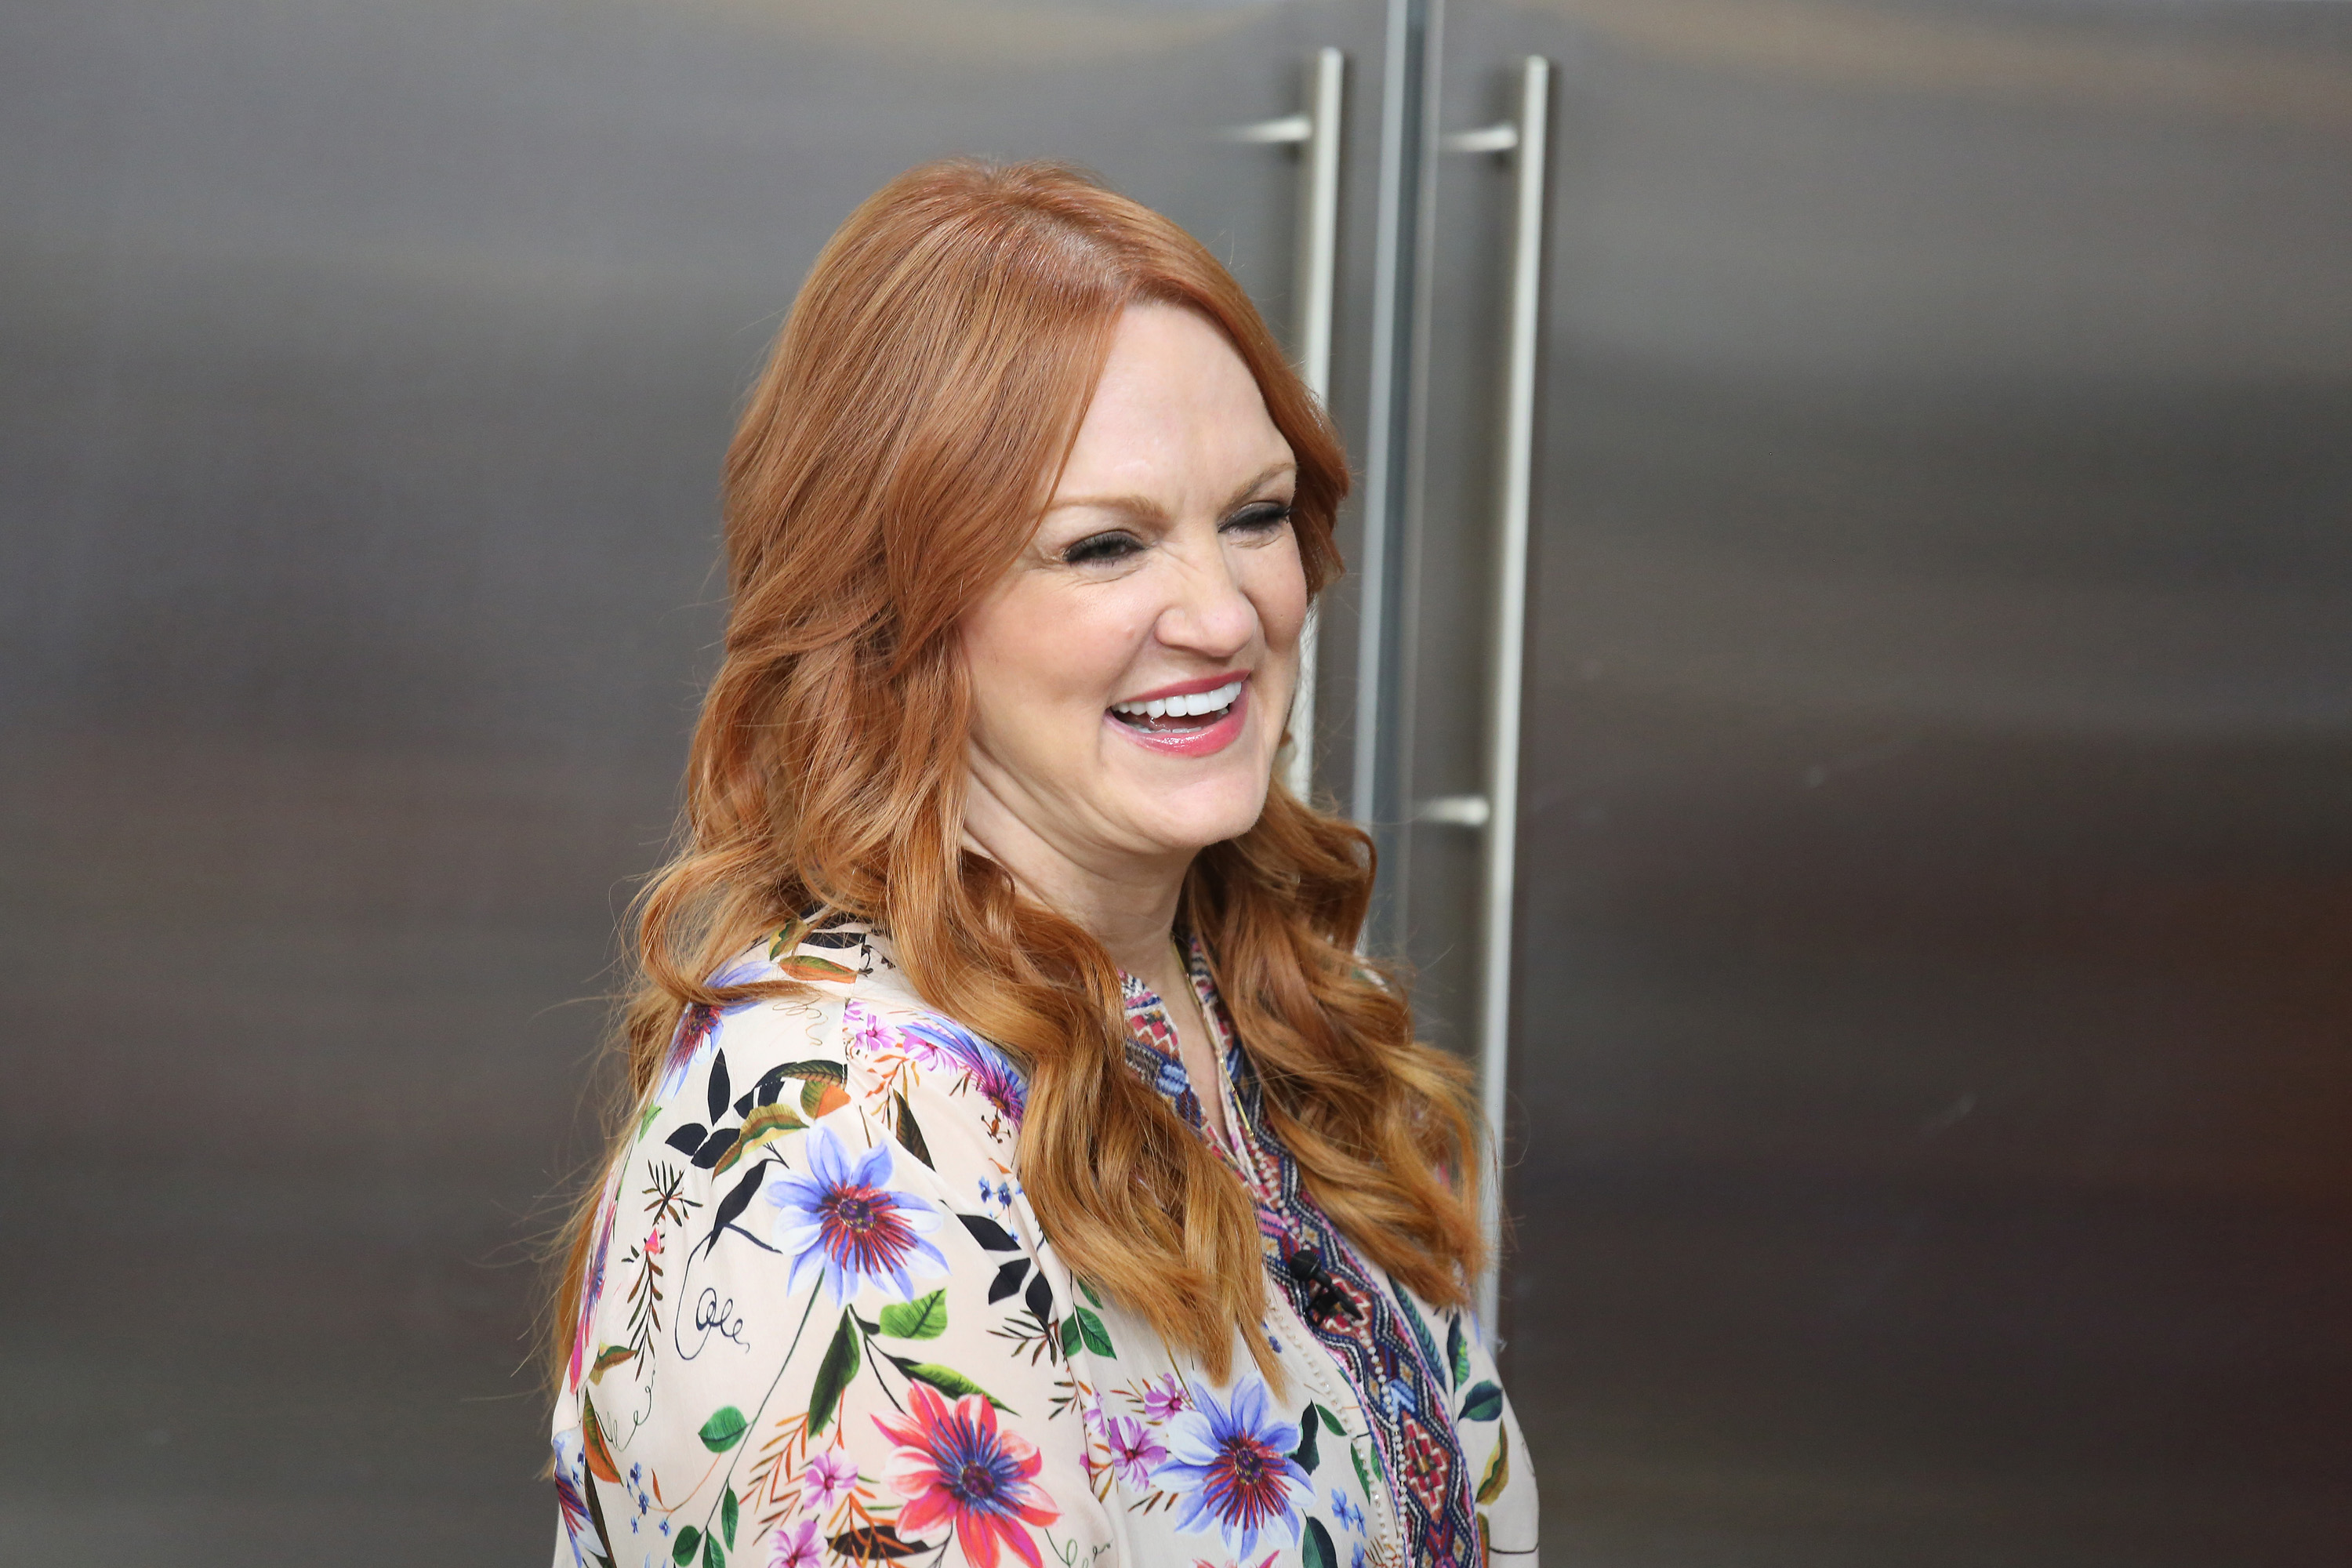 The Pioneer Woman Ree Drummond wears a floral shirt while giving a cooking demonstration on the Today show.